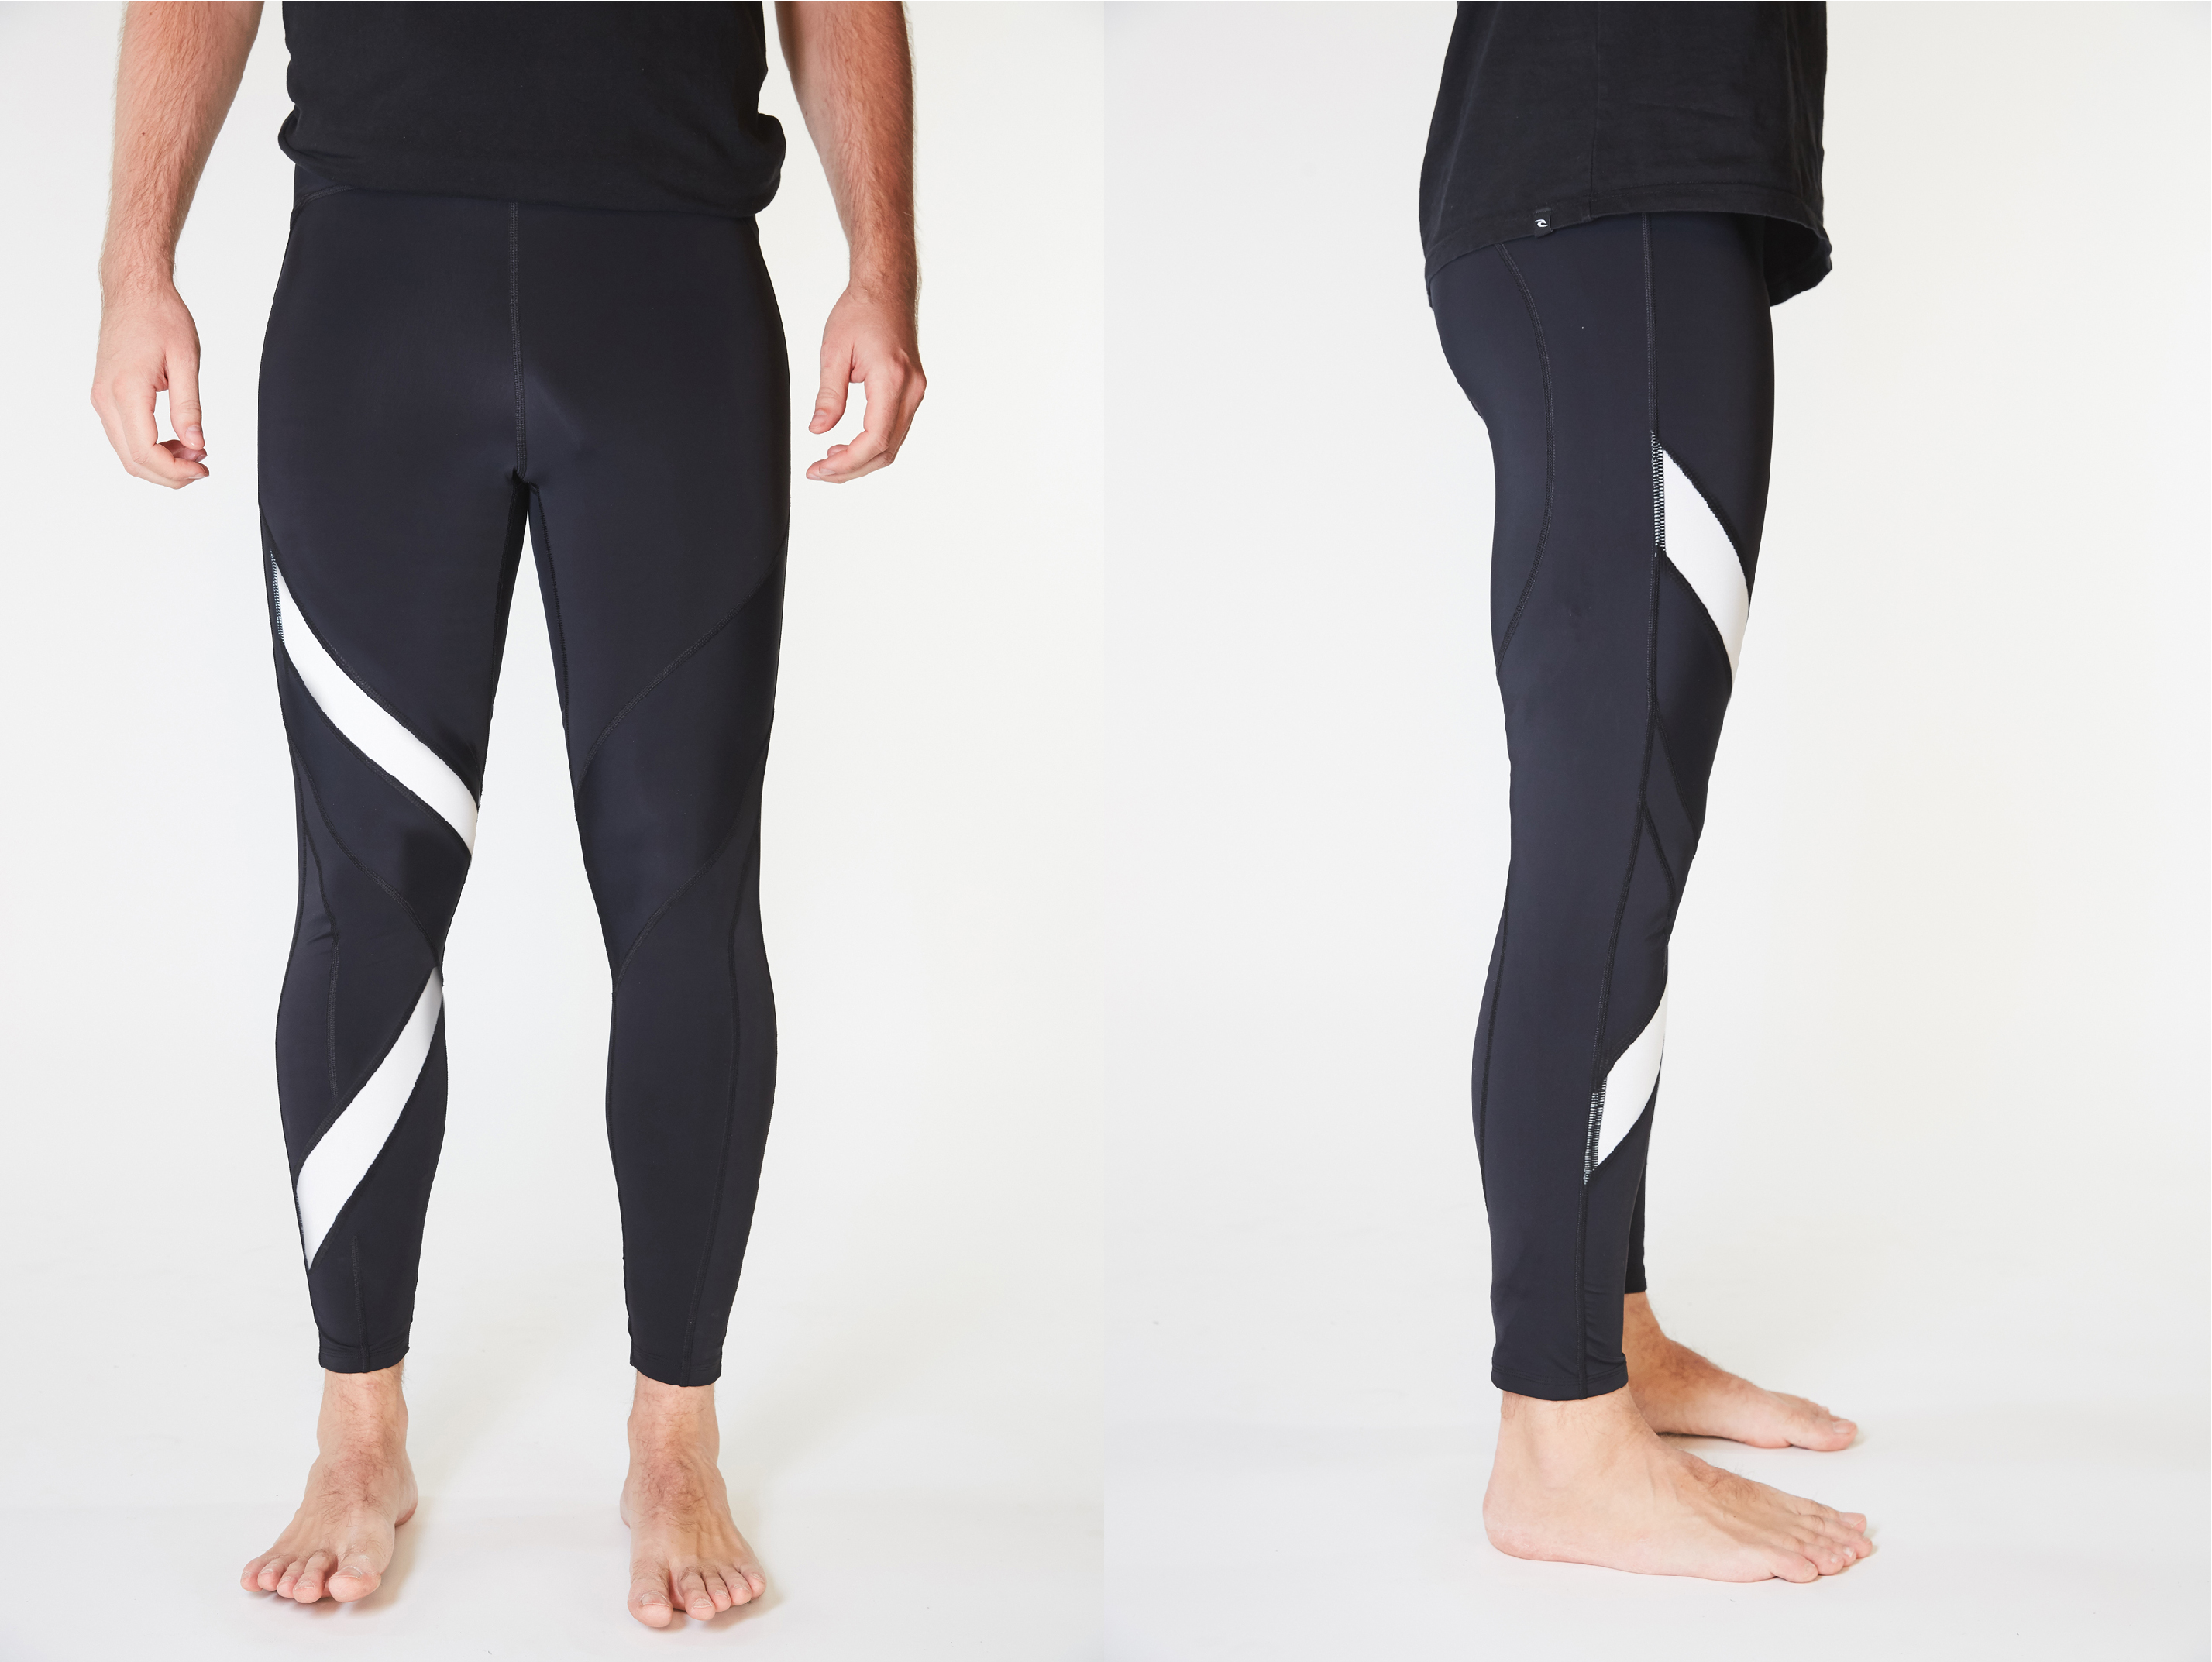 Wearable X Expands Their Smart Yoga Gear Collection - COOL HUNTING®